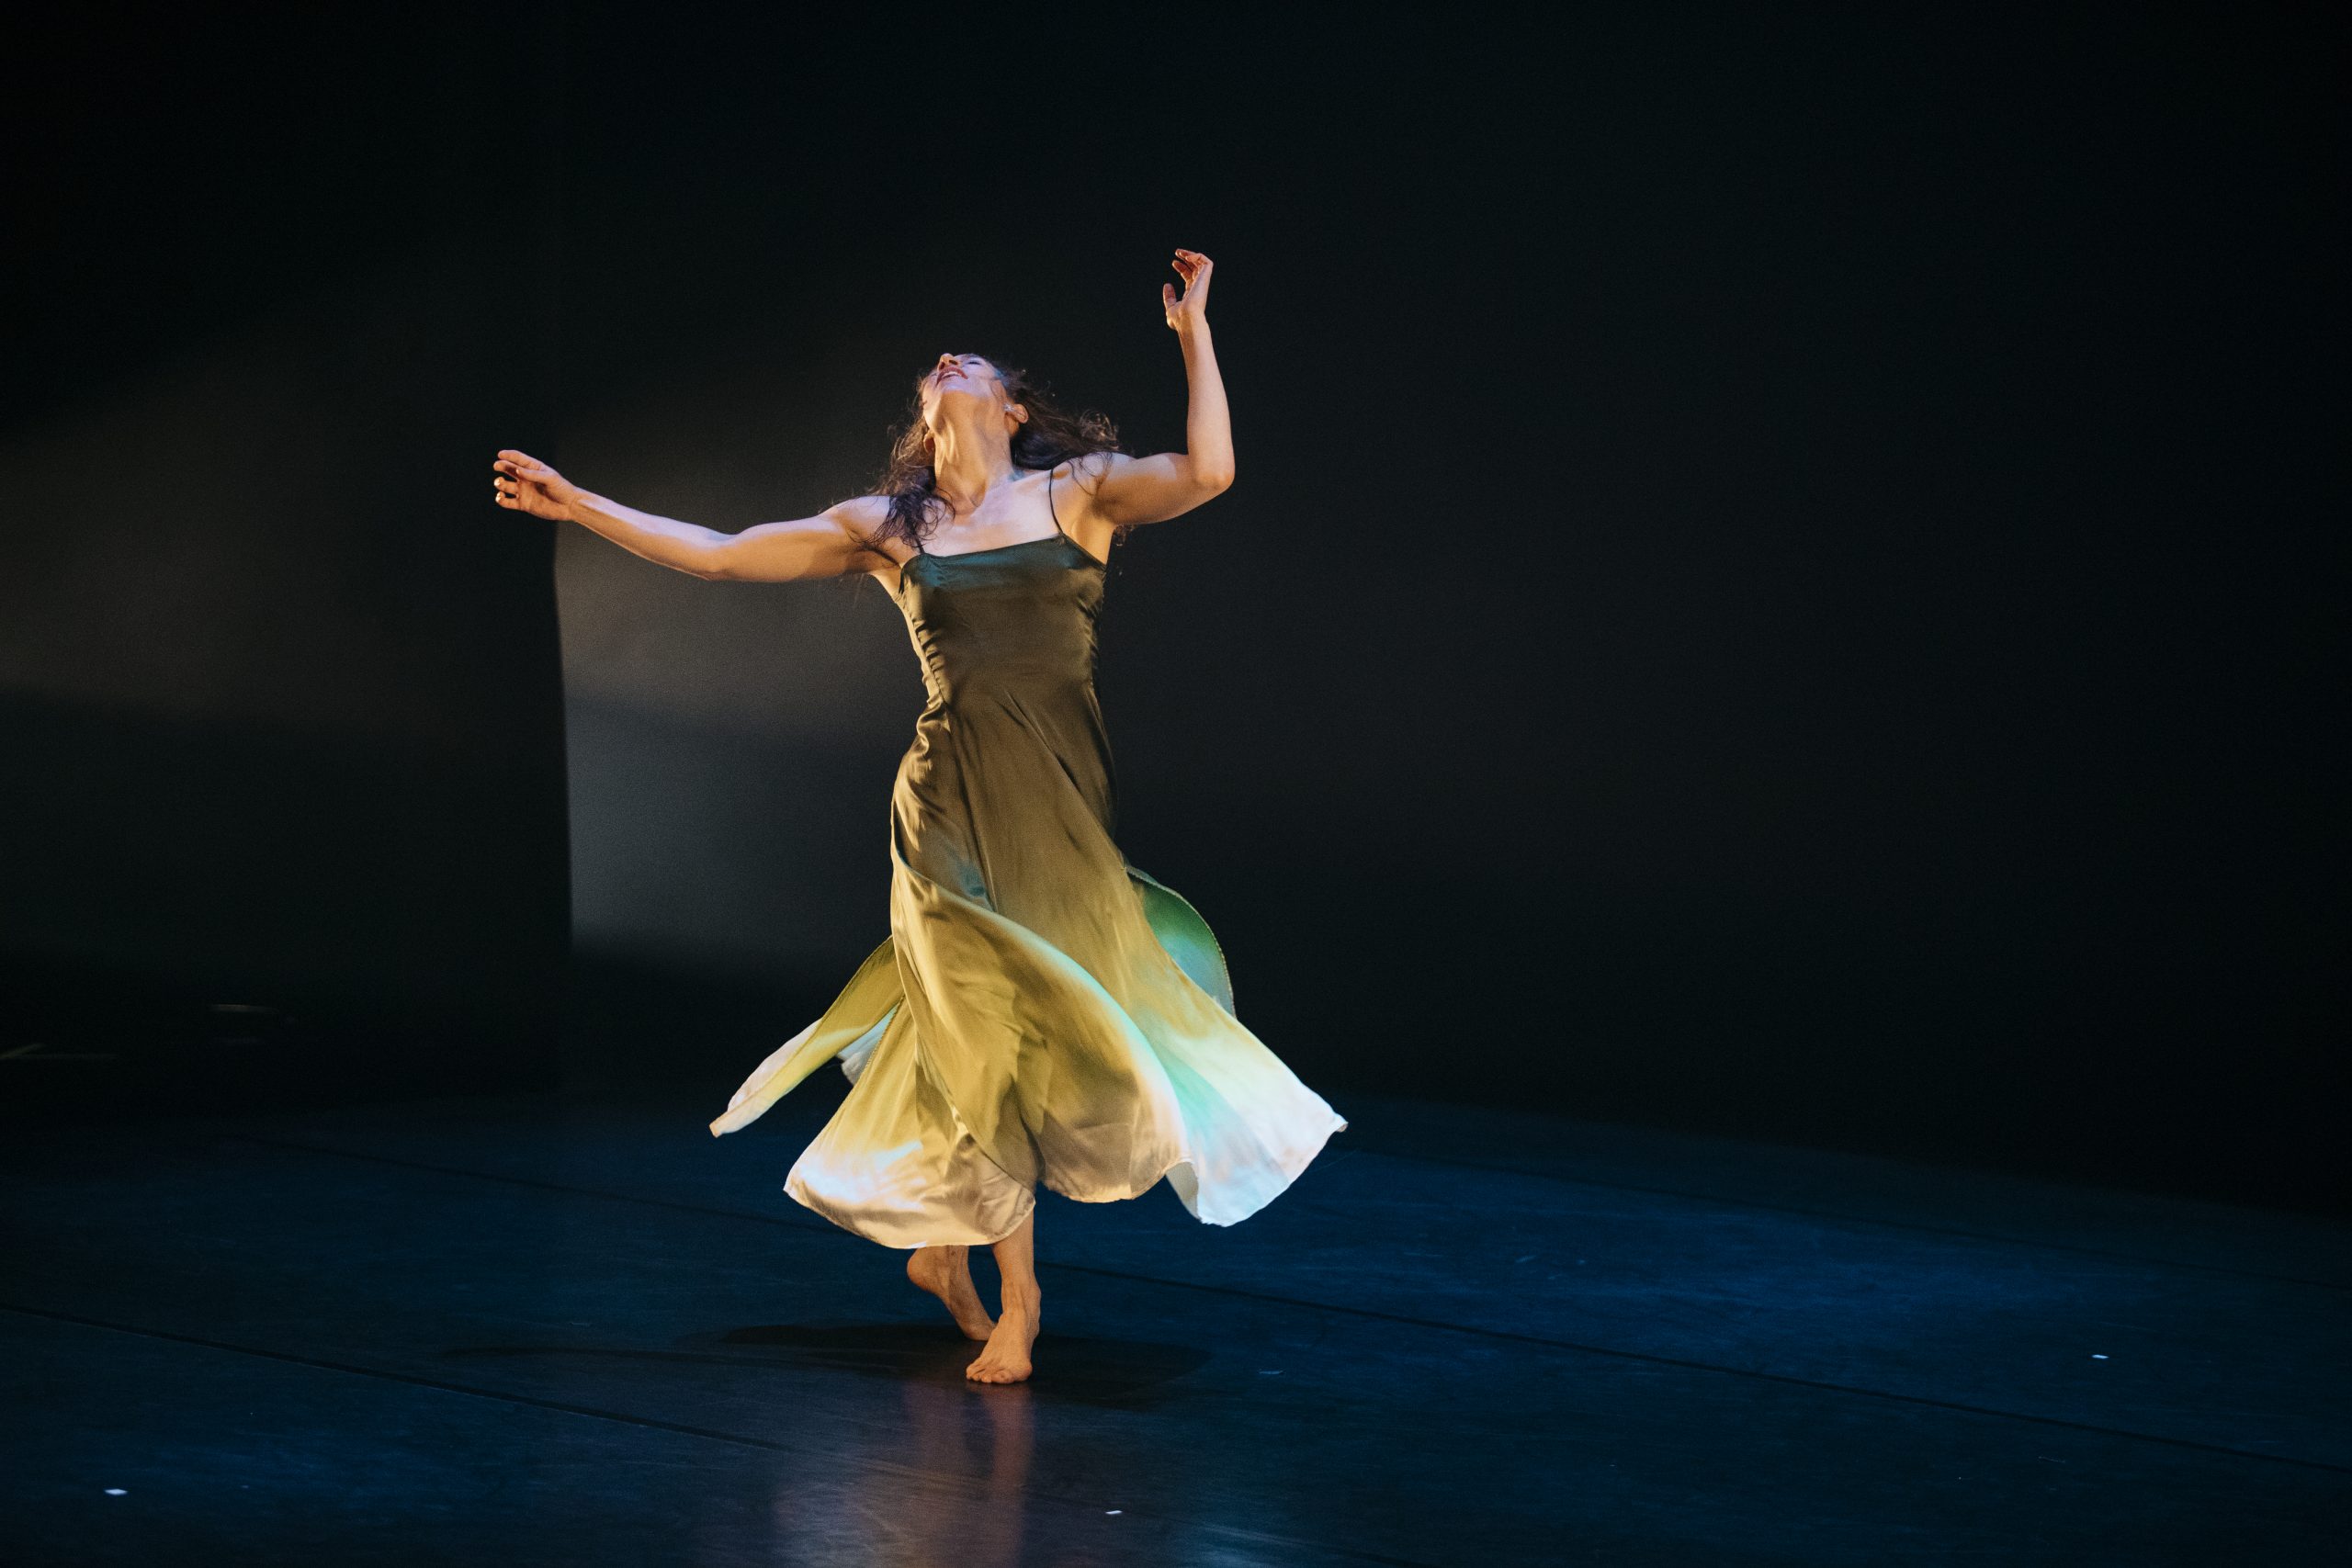 DON'T MISS THE PREMIERE OF THE PULL OF SEASONS AT FESTIVAL QUARTIERS DANSES  ON SEPTEMBER 15 AT 7:30 PM! - Margie Gillis Dance Foundation